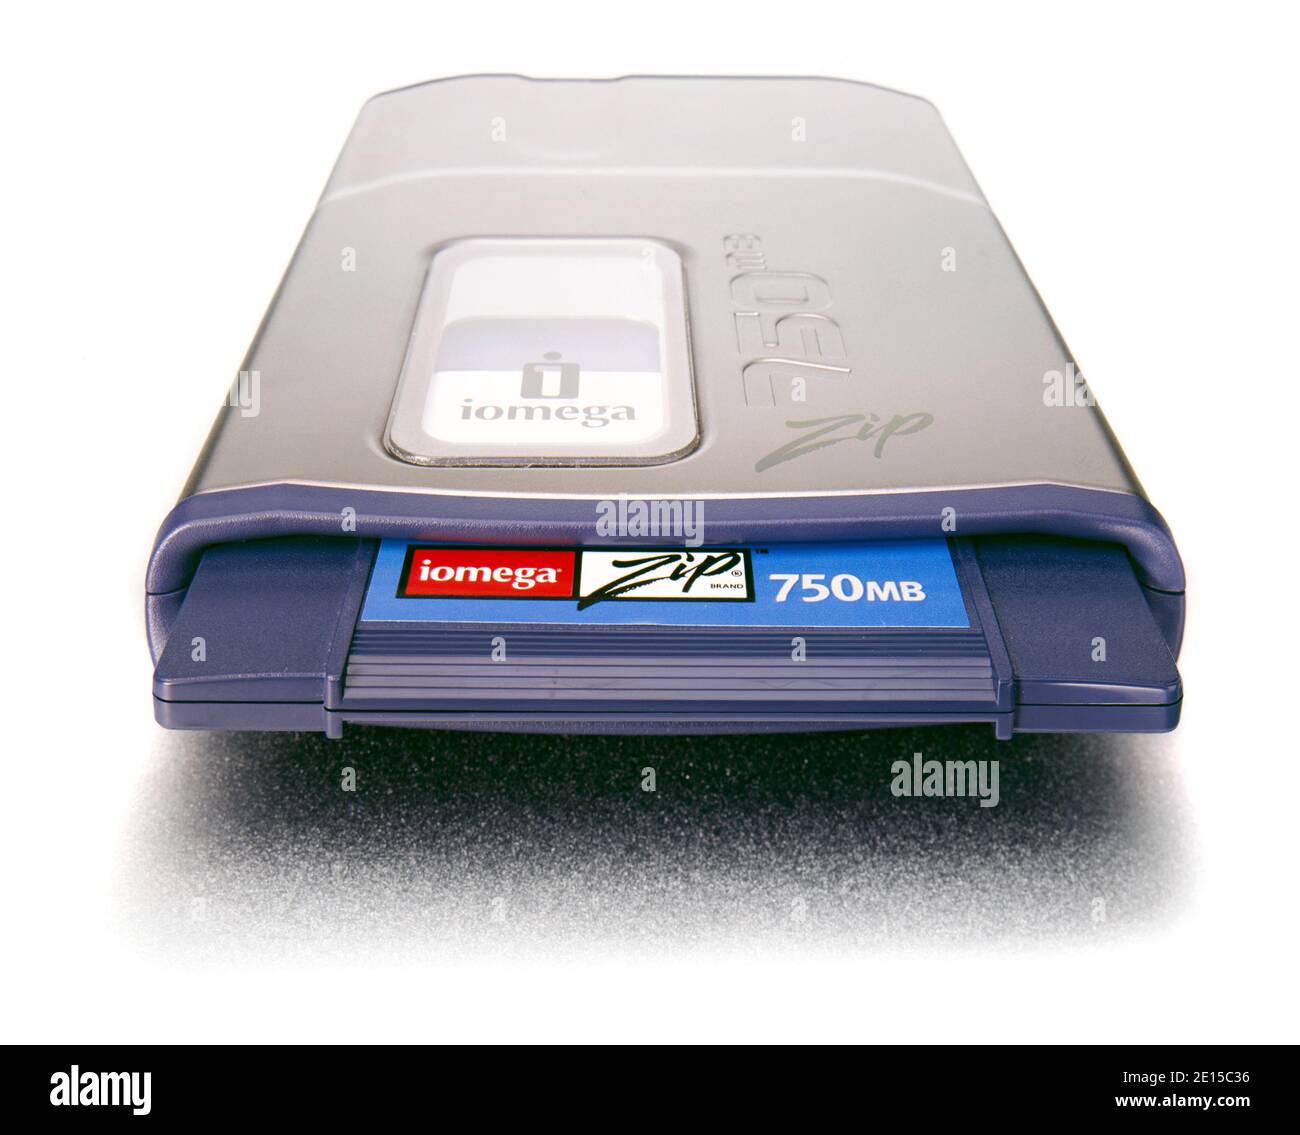 iomega zip disk drive photographed on a white background Stock Photo